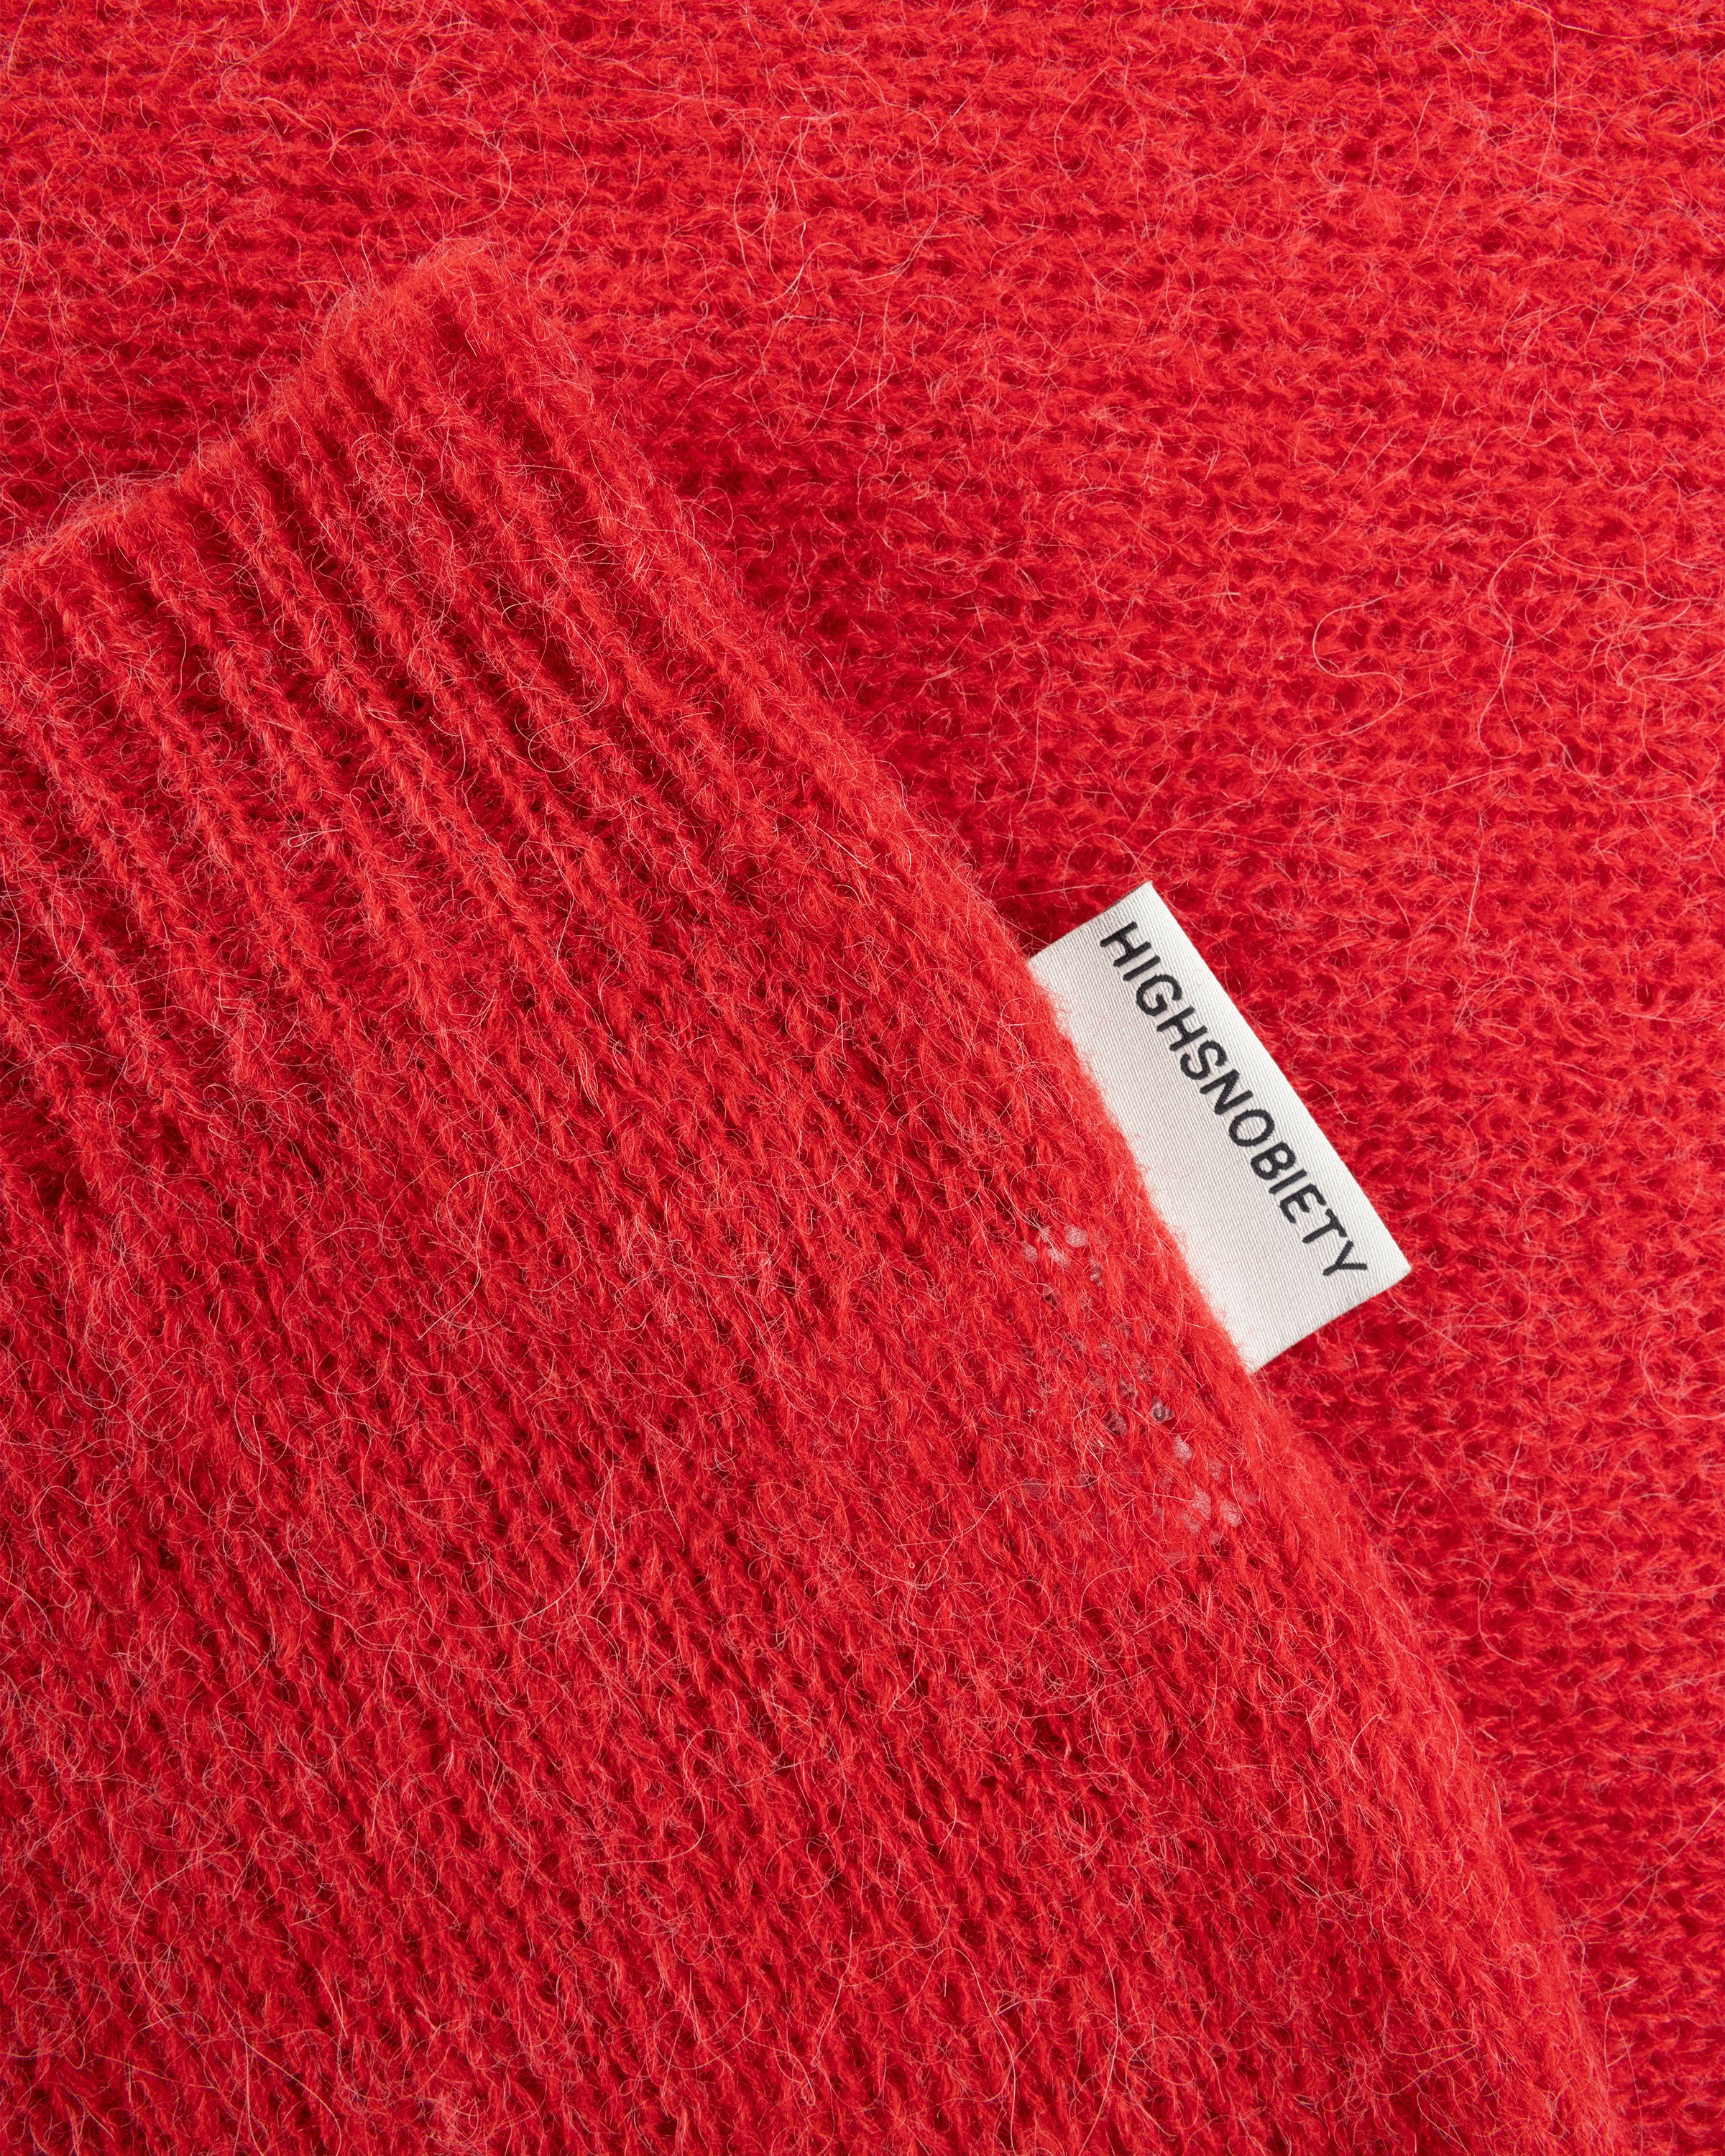 Highsnobiety HS05 - Loose Gage Tank Top Red - Clothing - Red - Image 9